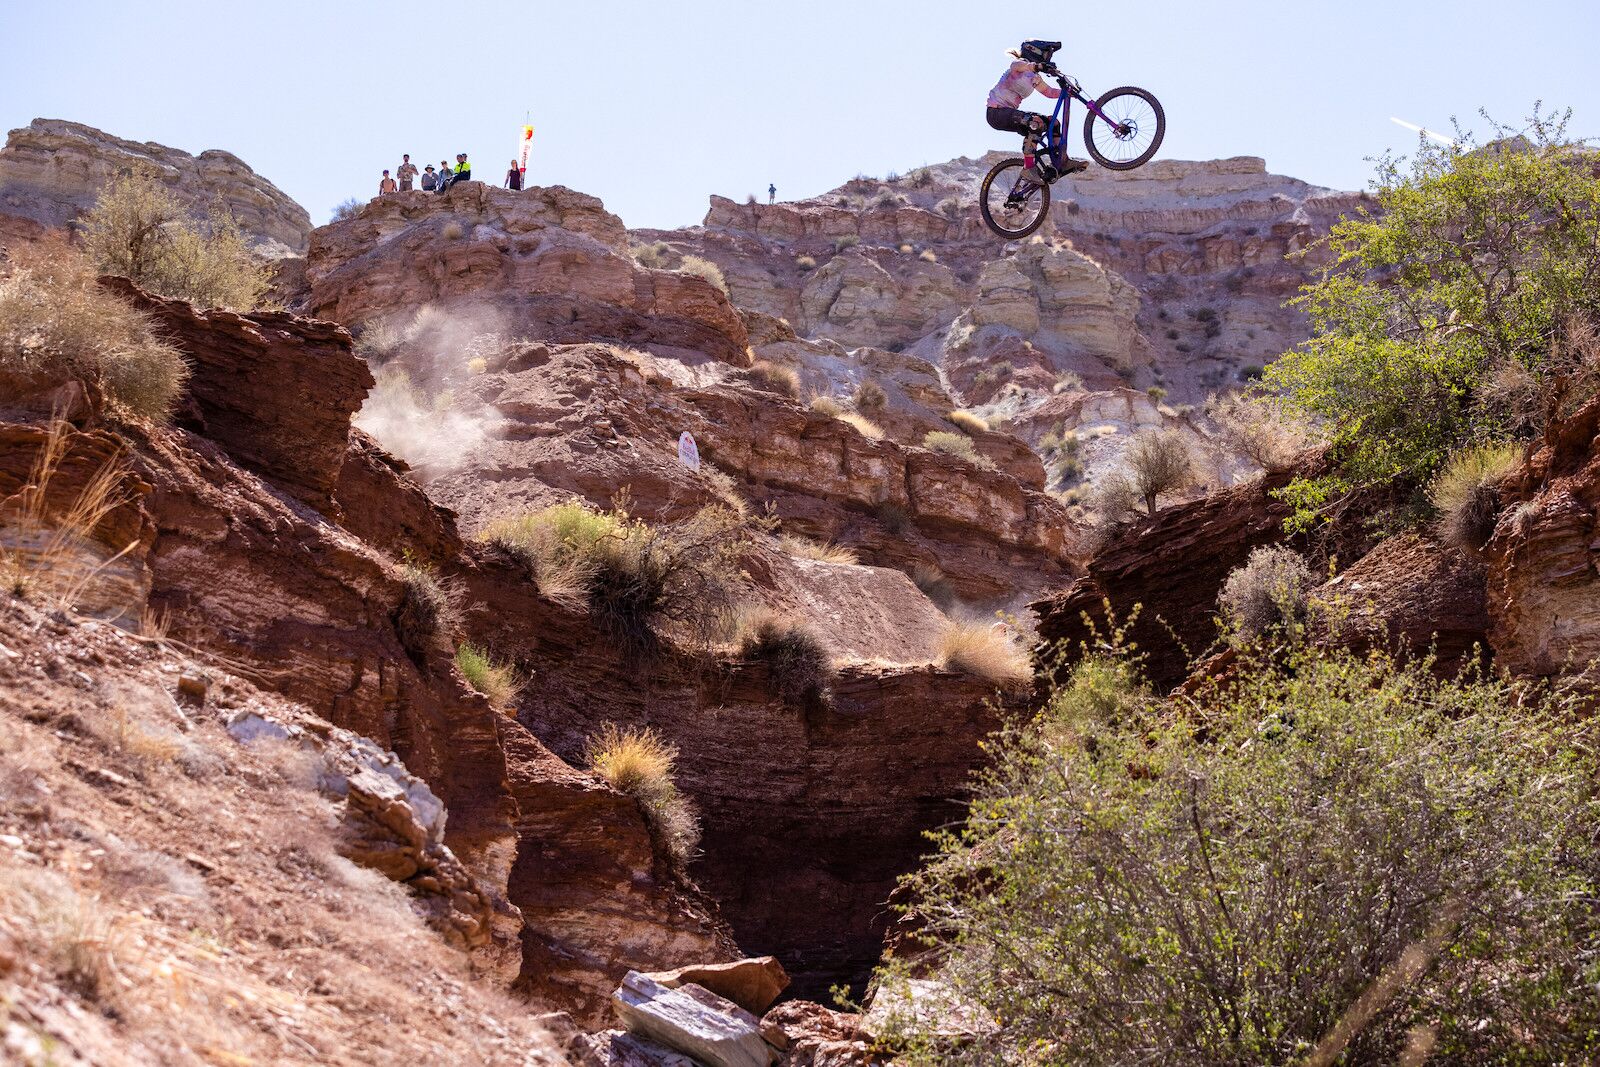 Catherine Aeppel / Red Bull Content Pool Chelsea Kimball hits a canyon gap at Red Bull Formation in Virgin, Utah, USA on 31 May, 2021.